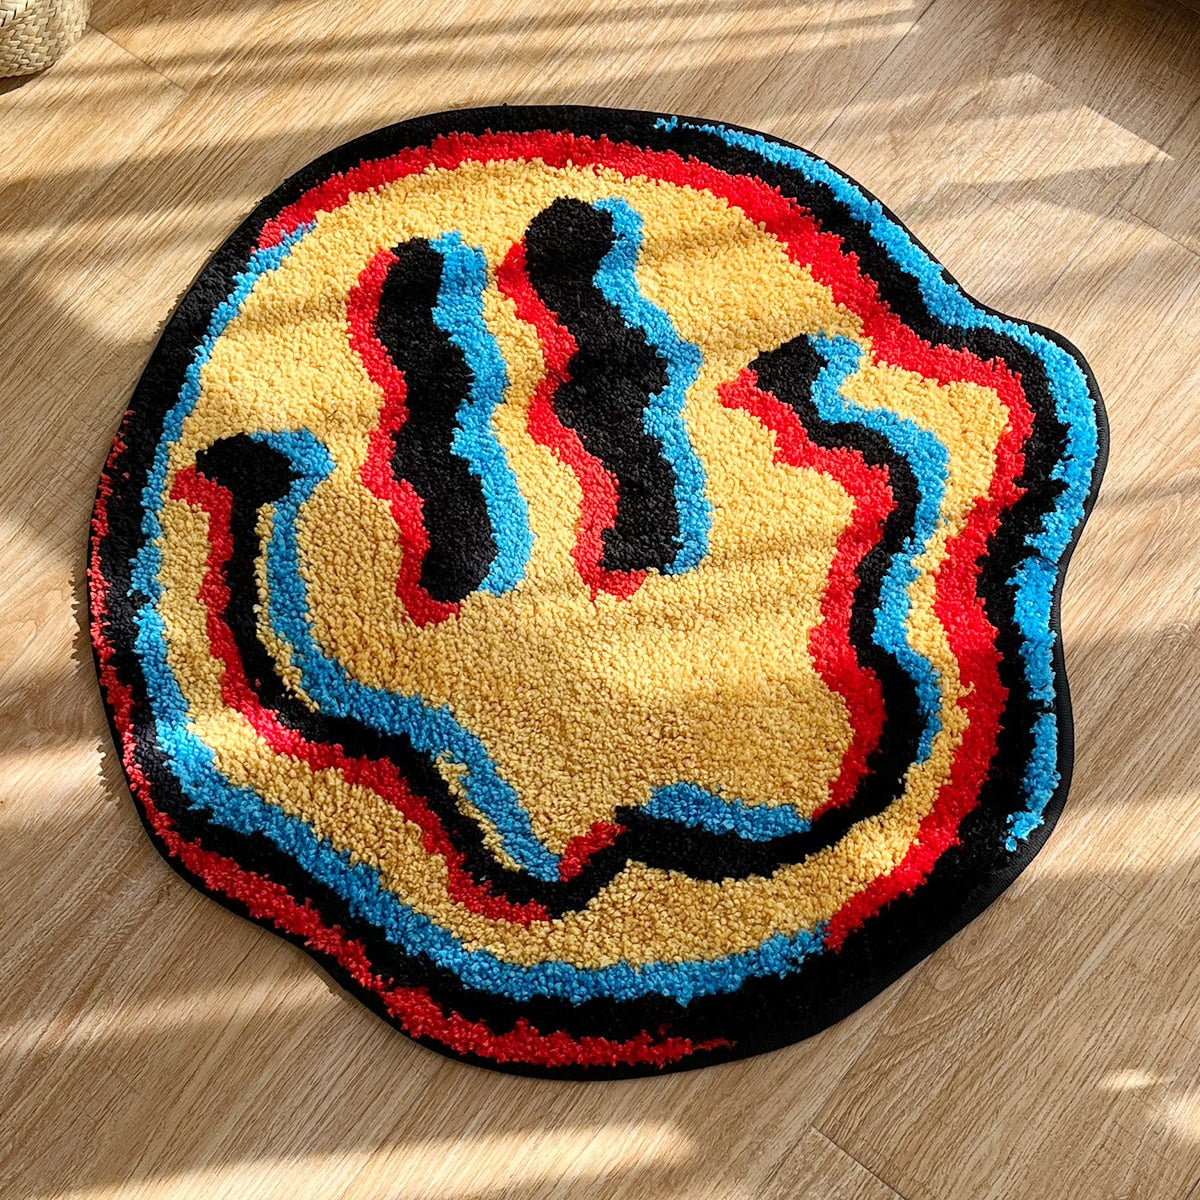 CORX Designs - Glitch Smiling Face Rug - Review